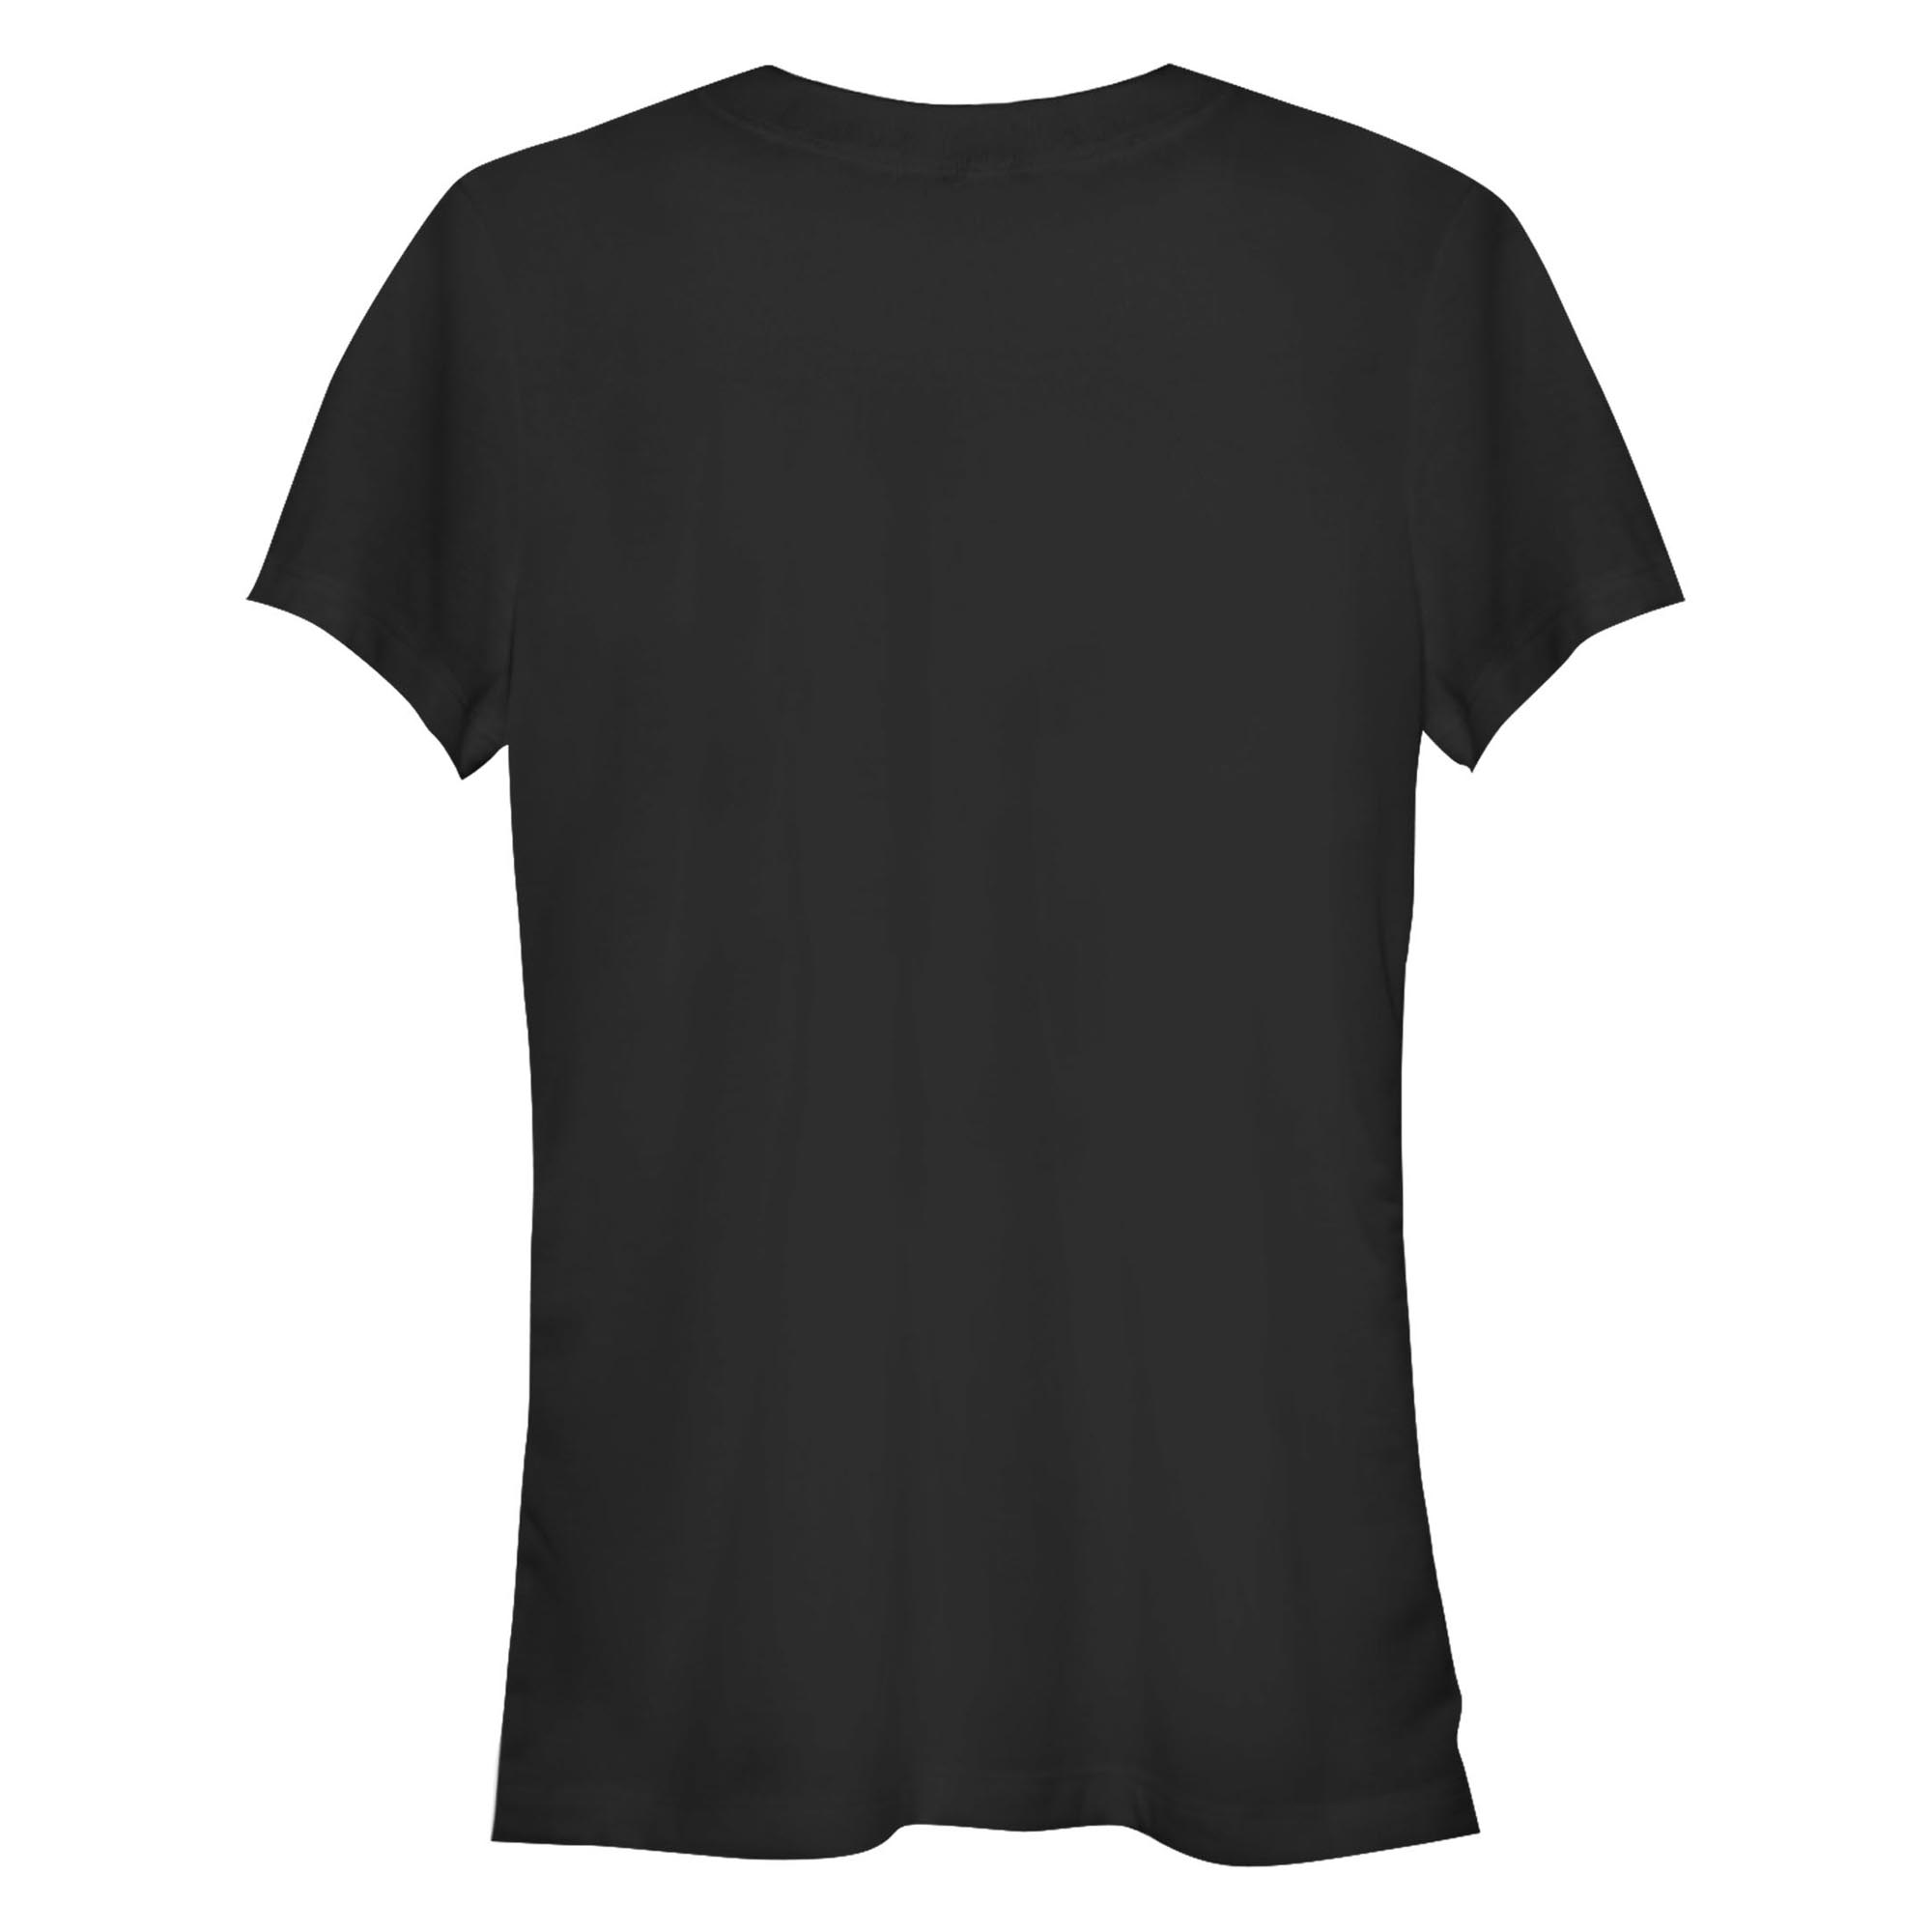 Junior's CHIN UP Like a Girl  Graphic Tee Black Small - image 2 of 3